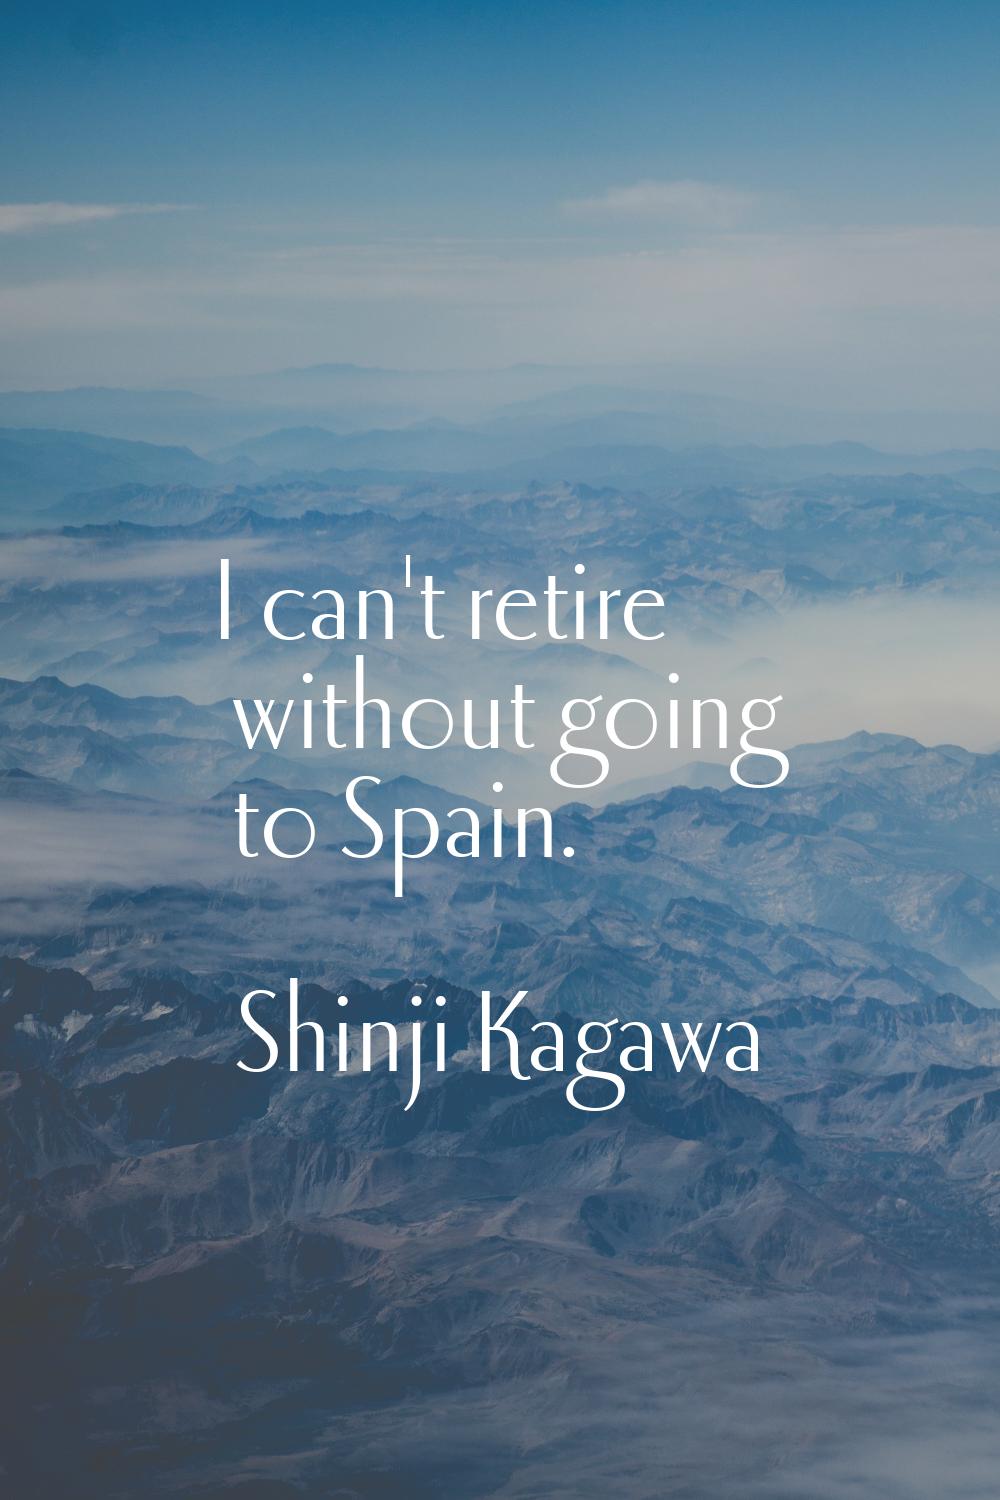 I can't retire without going to Spain.